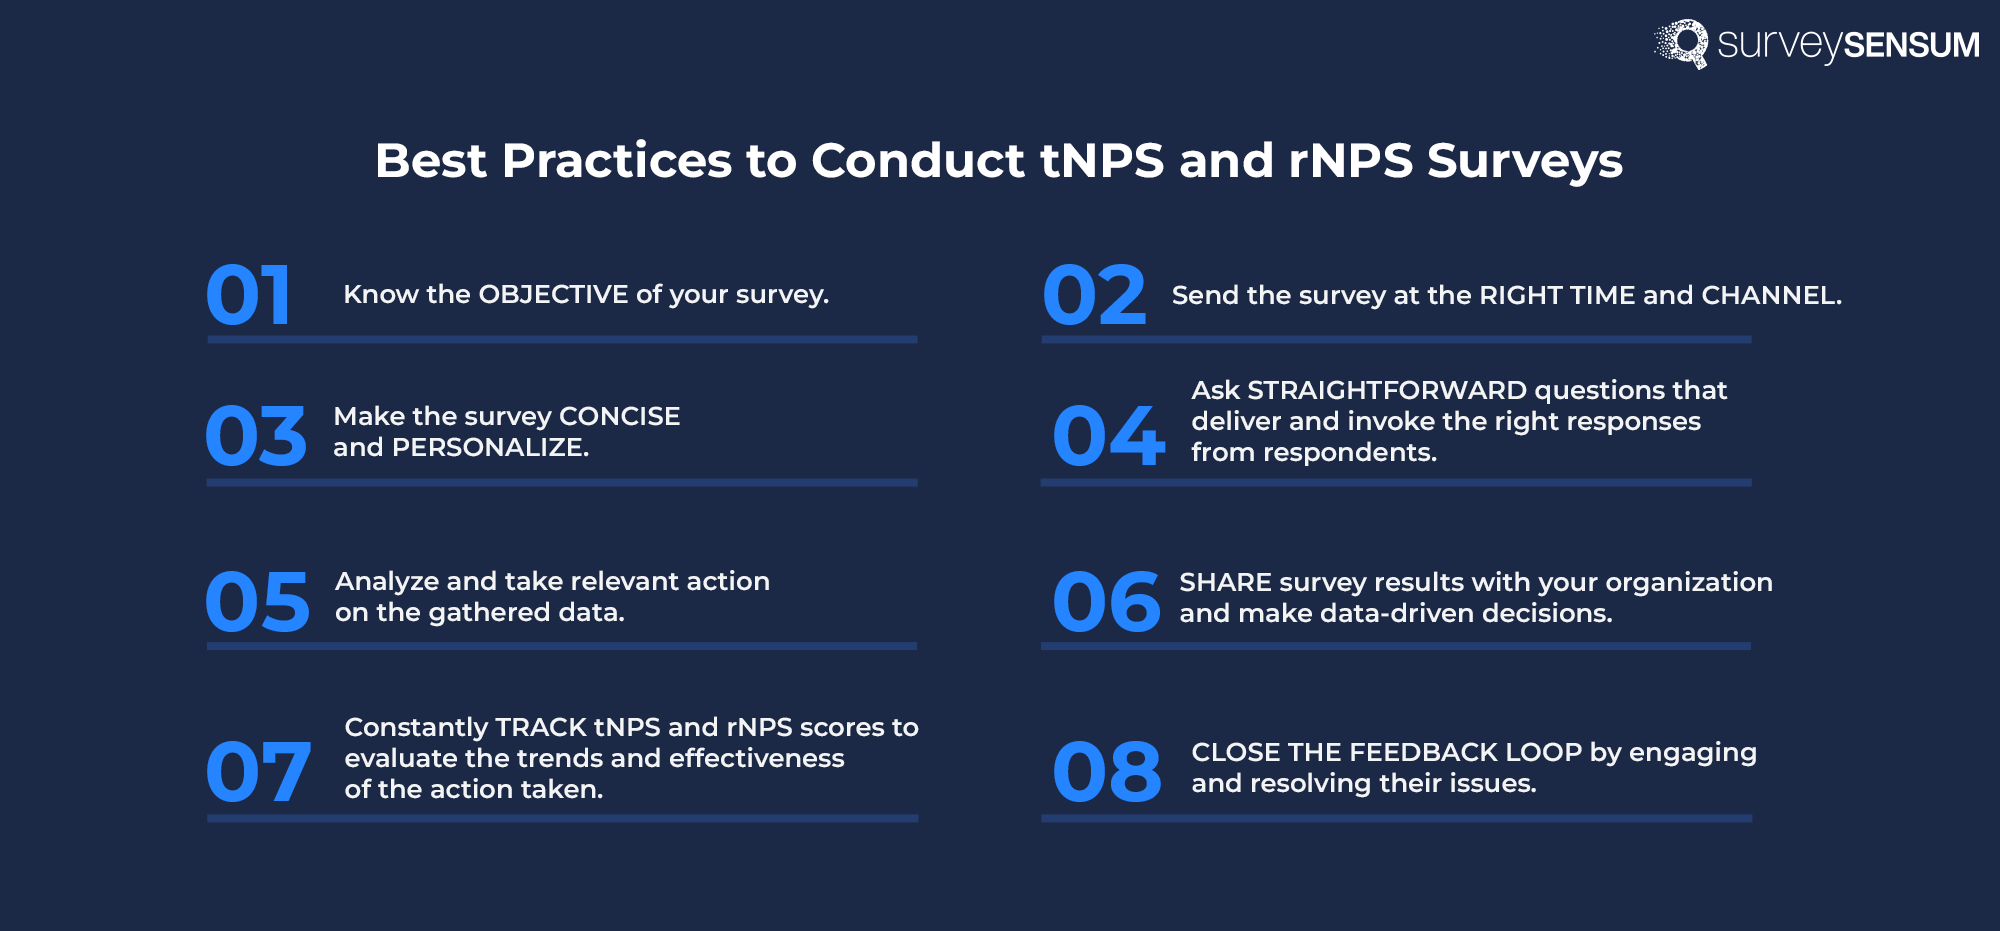 This is the image of Best Practices to Conduct tNPS and rNPS Surveys.